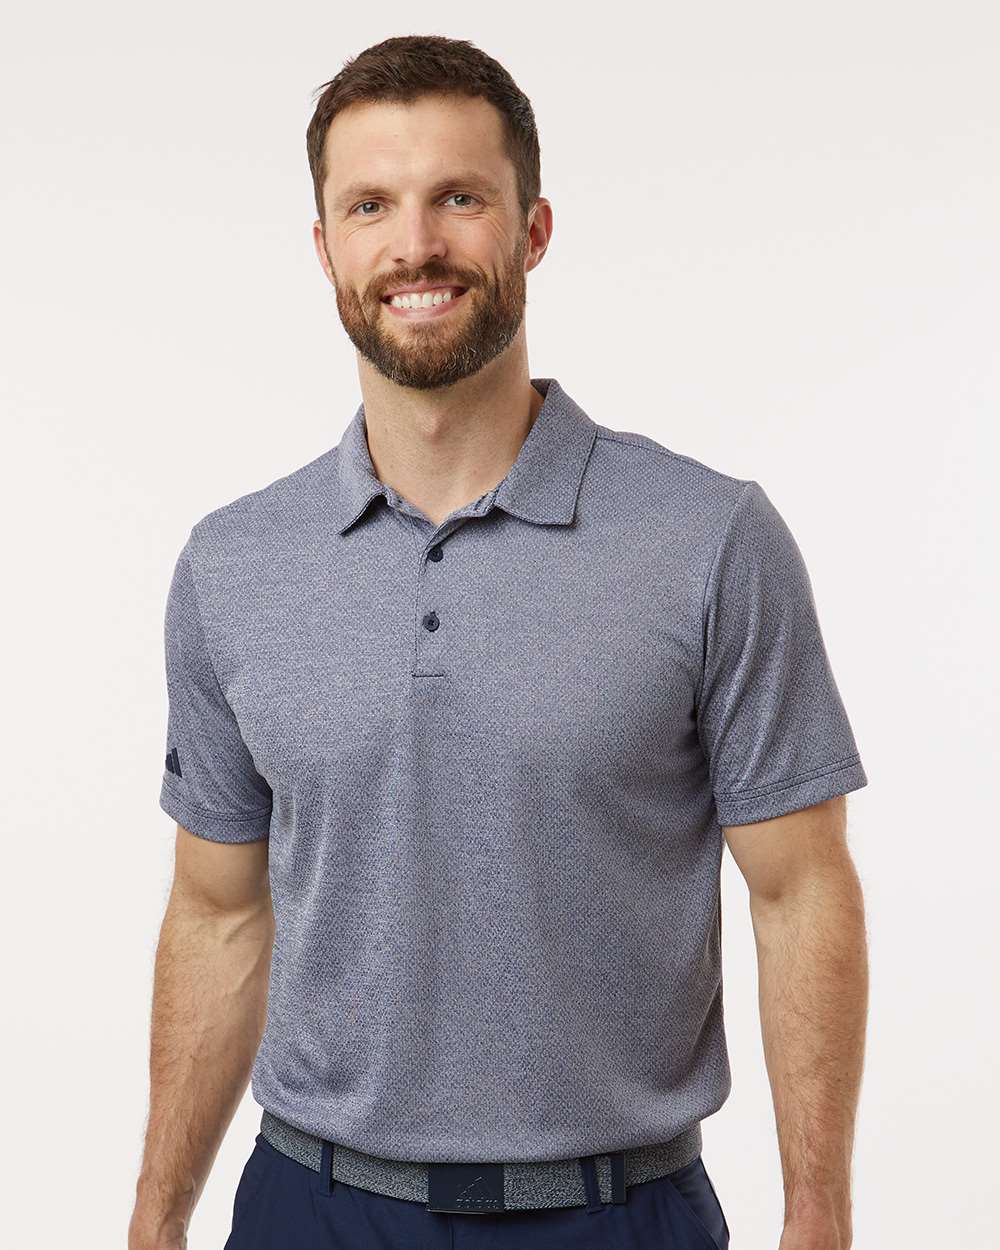 Adidas Men's Space Dyed Polo